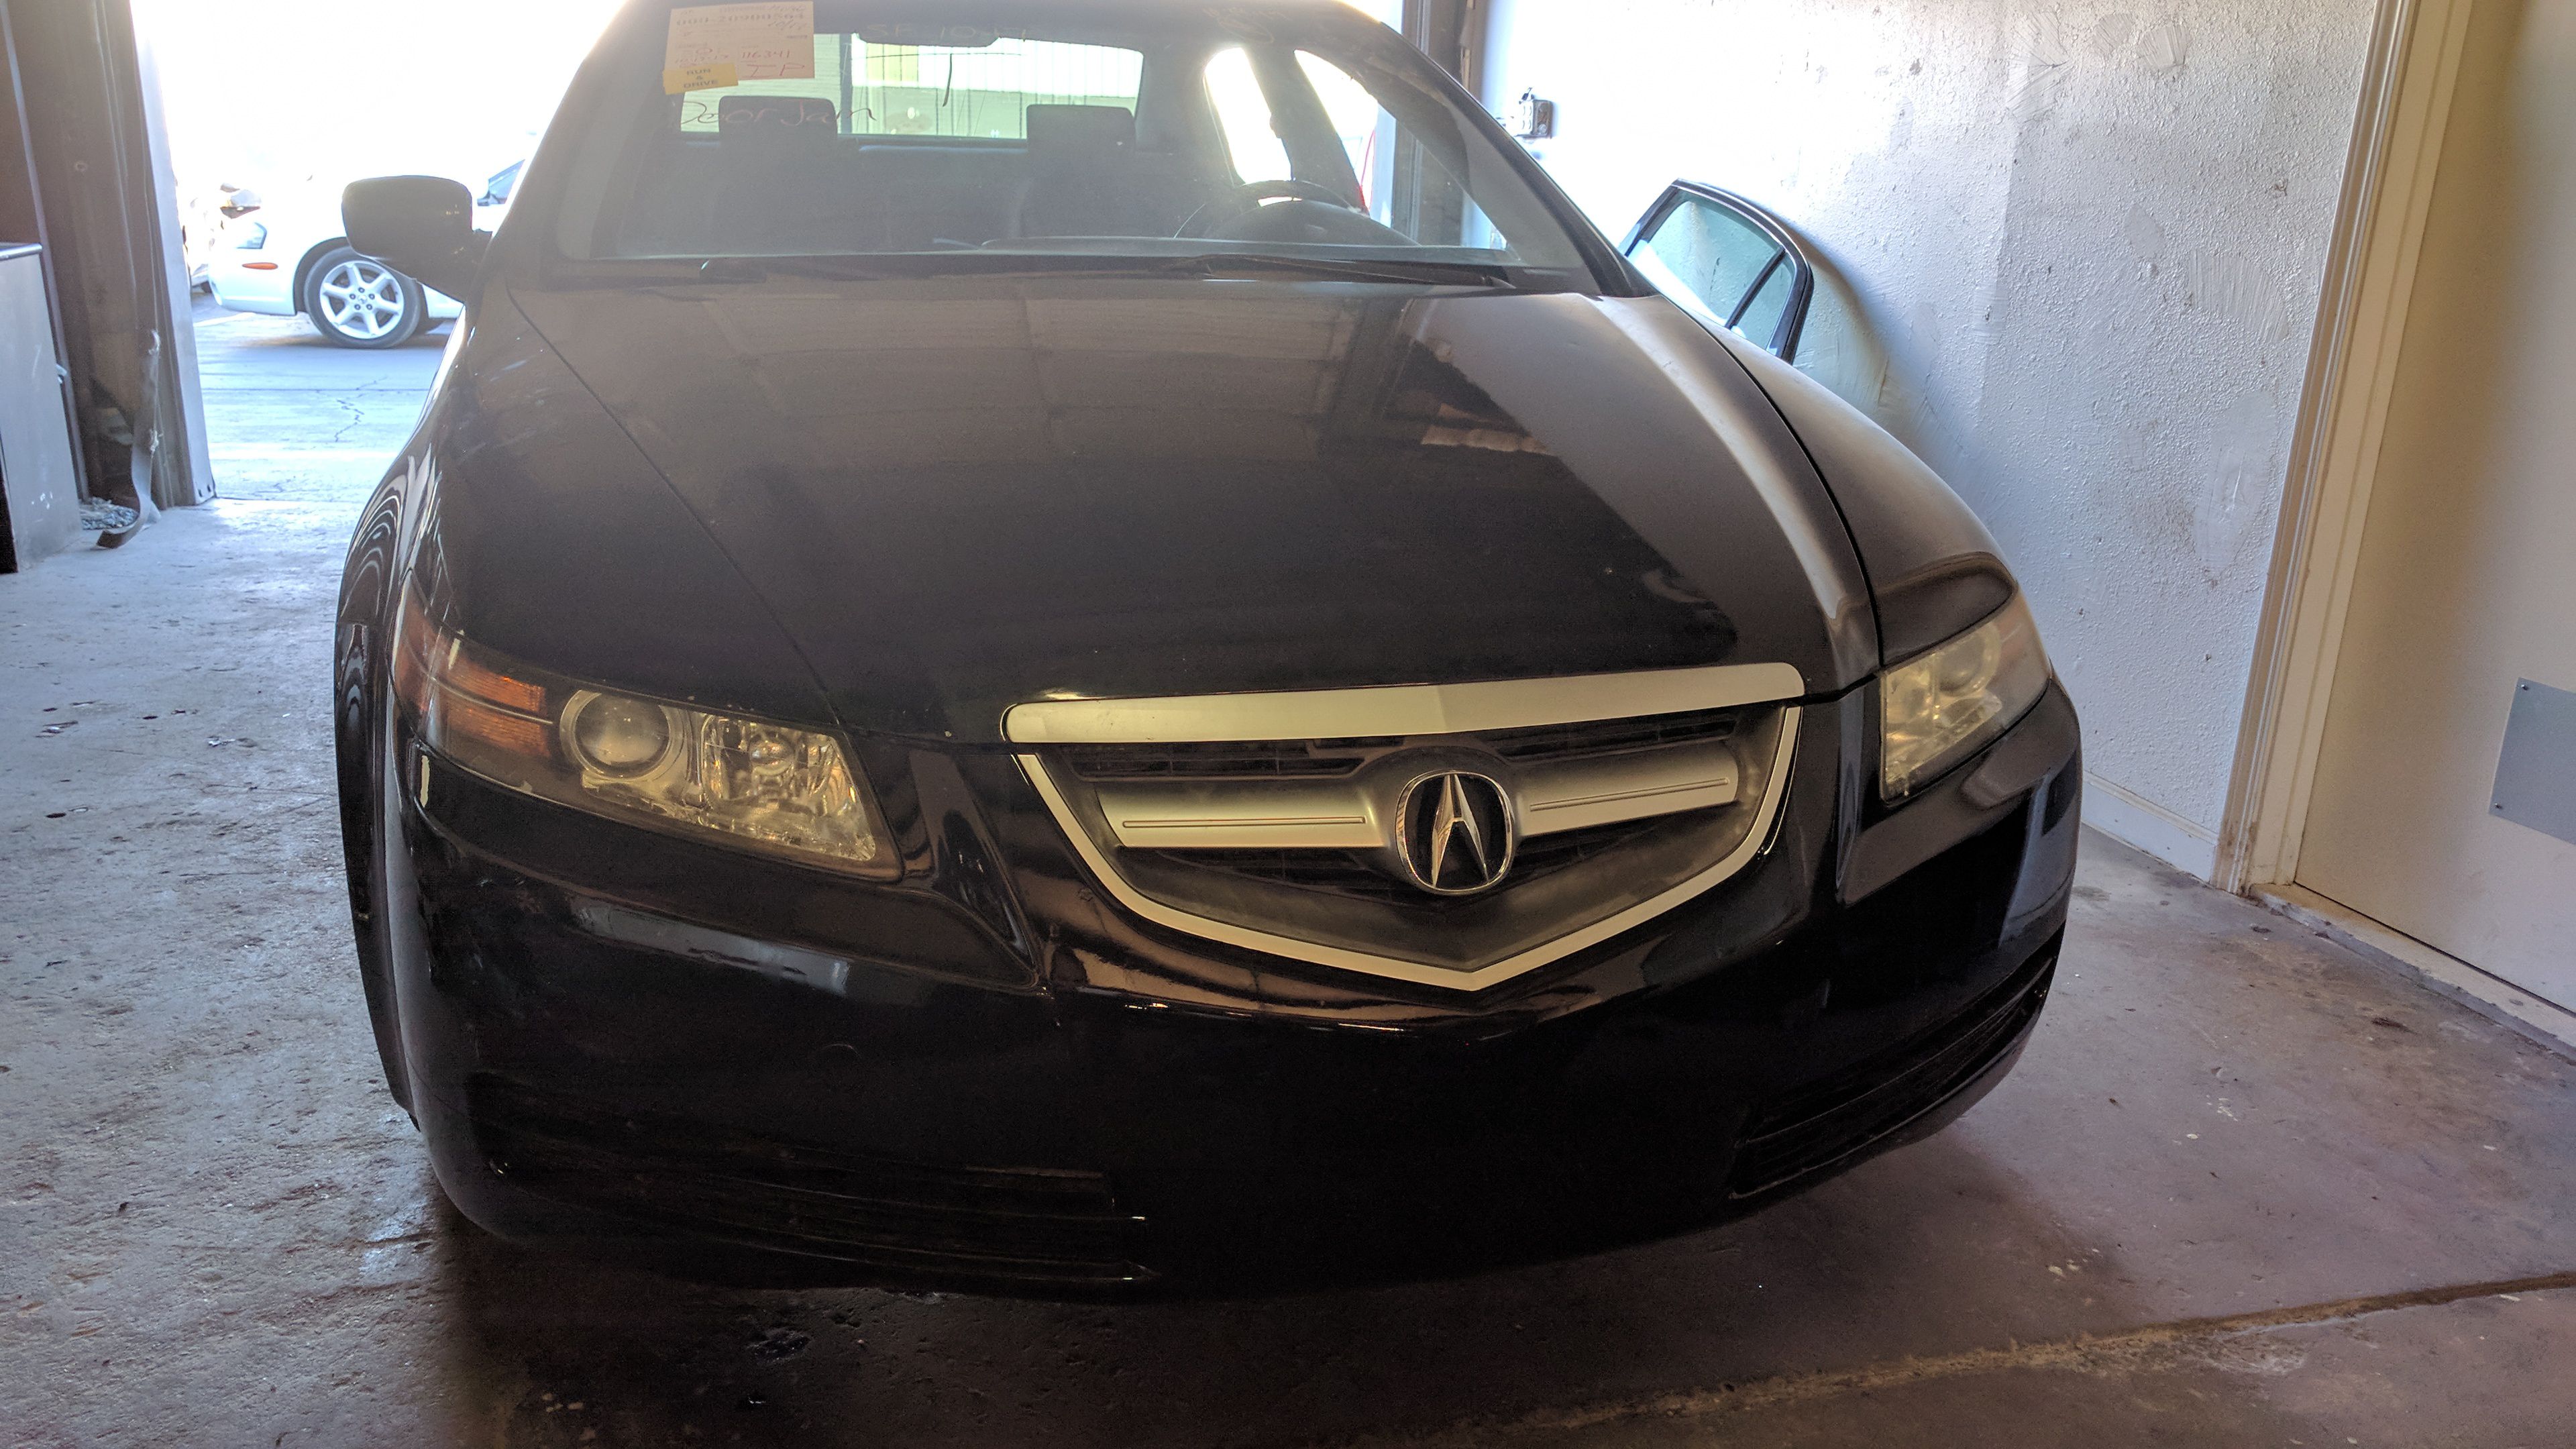 2004 2005 2006 2007 2008 Acura TL Black parting out parts